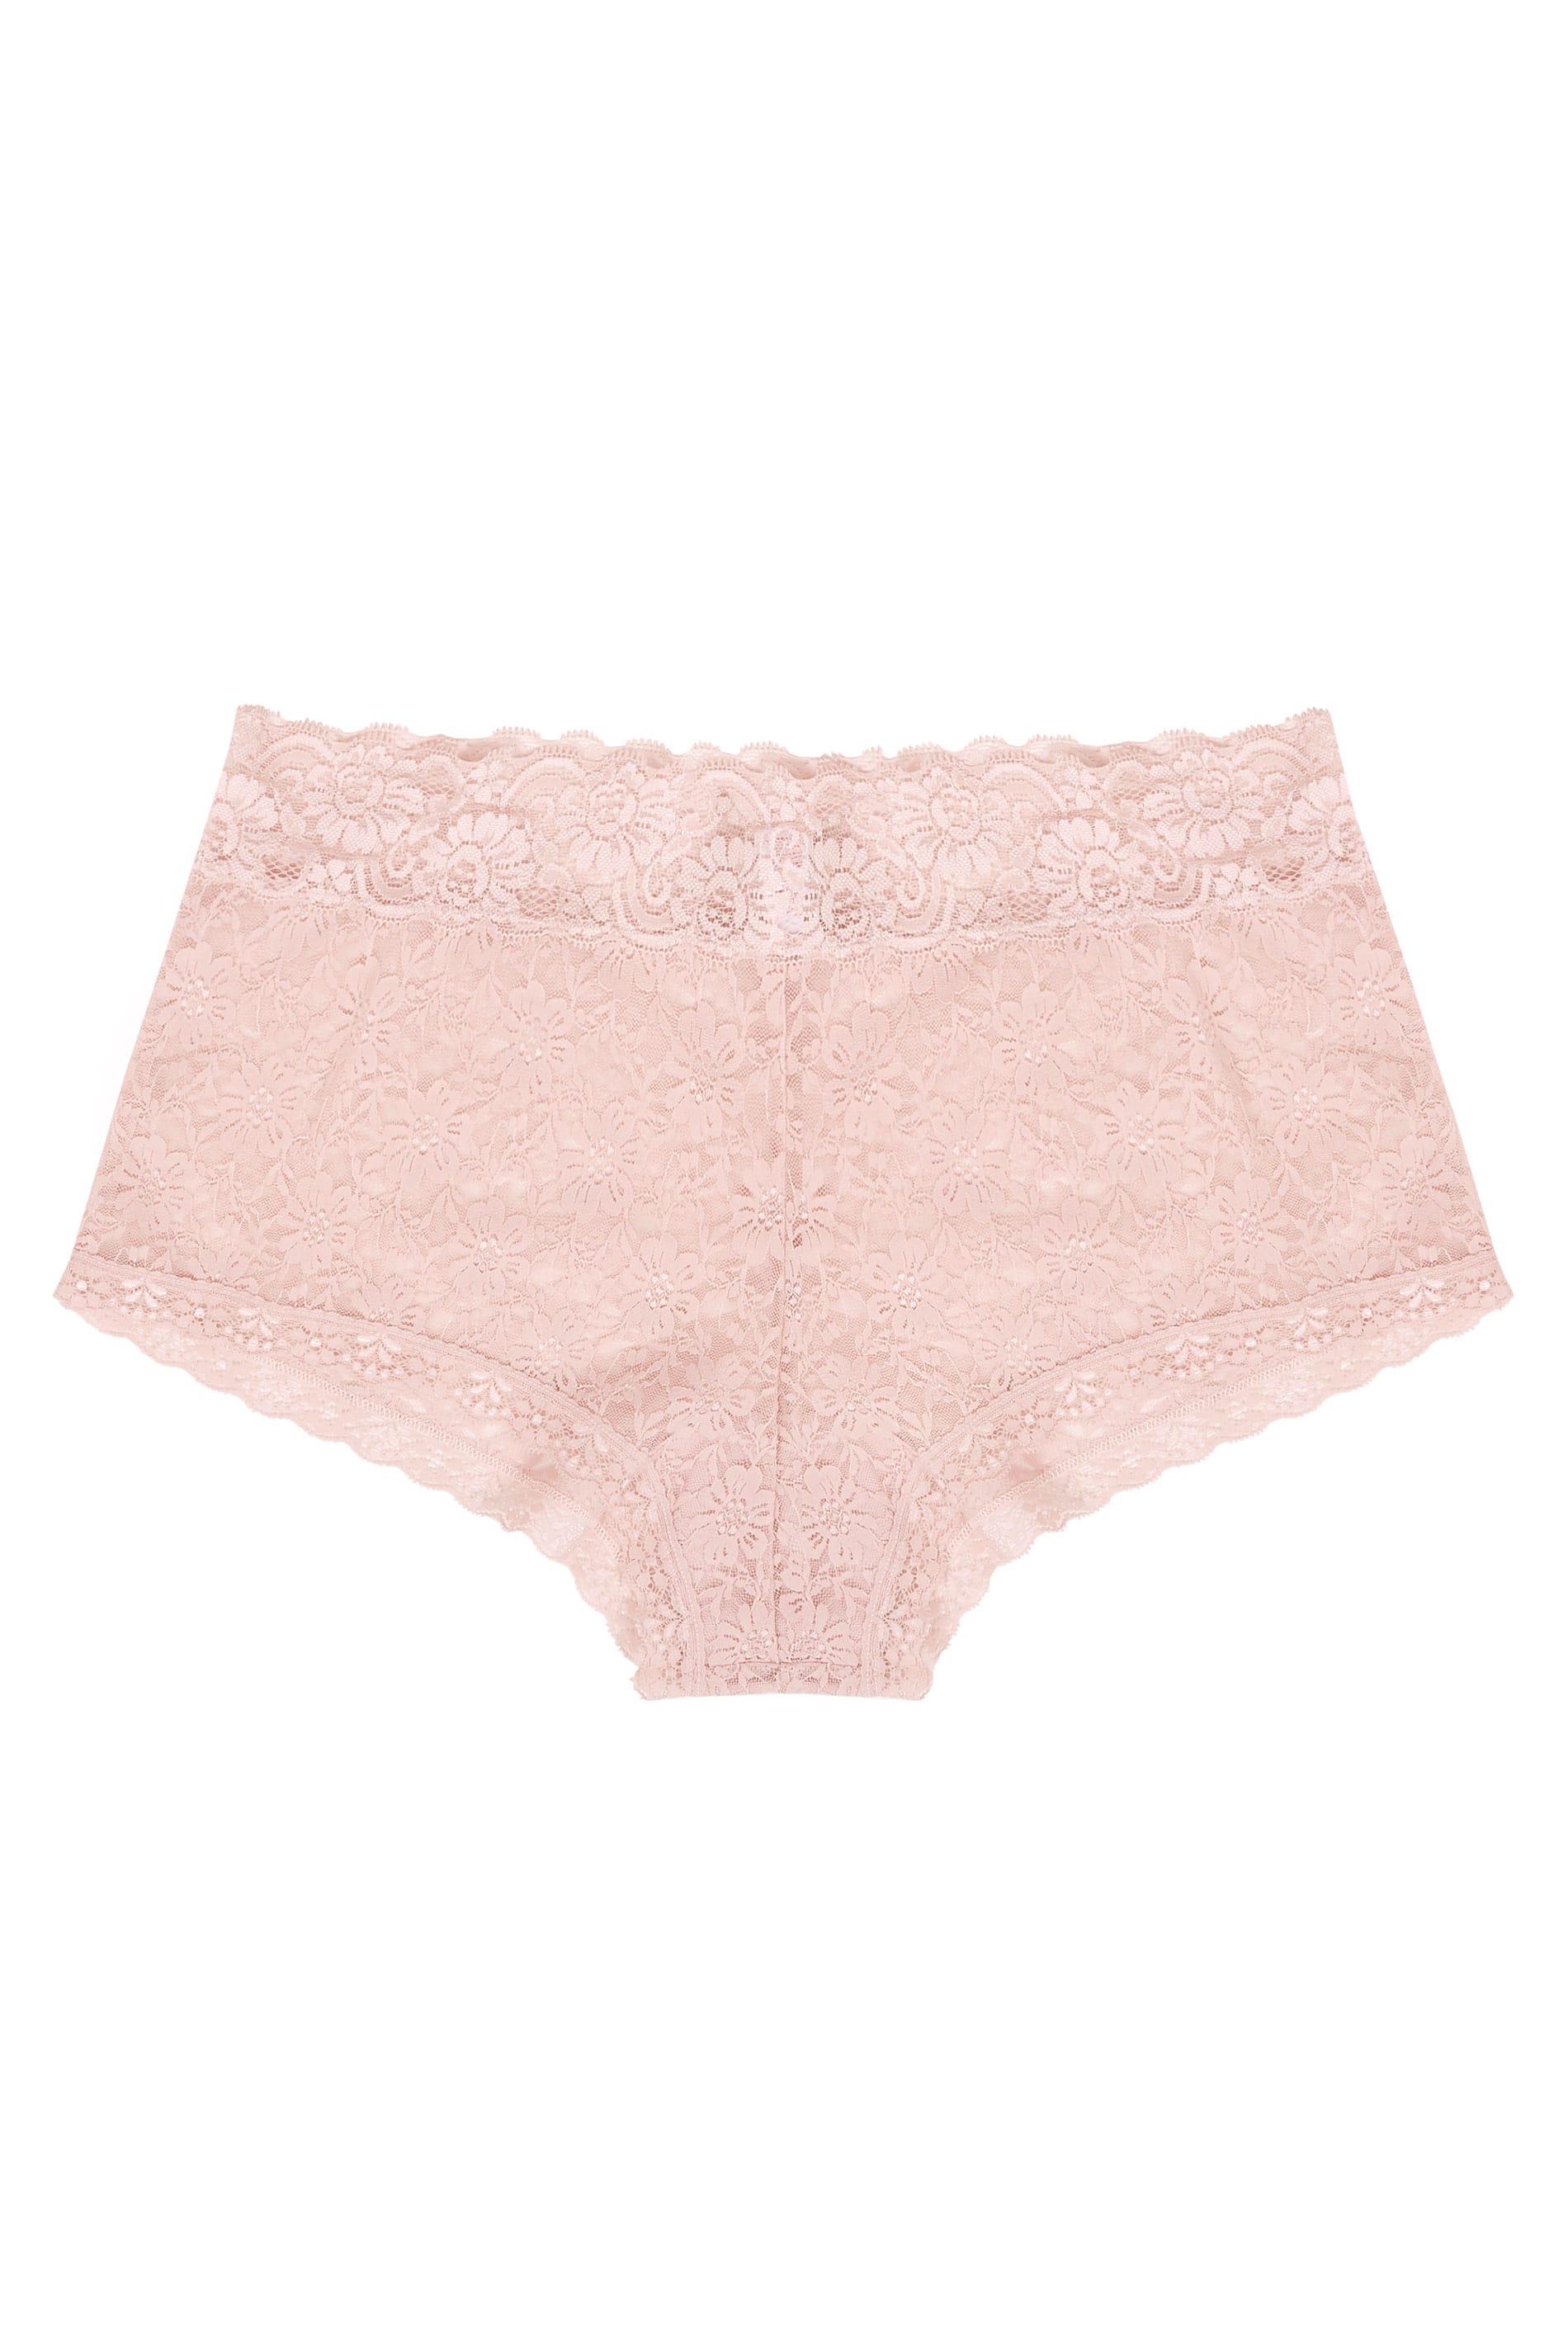 Dusky Pink Floral Lace Shorts | Plus Sizes 16 to 36 | Yours Clothing